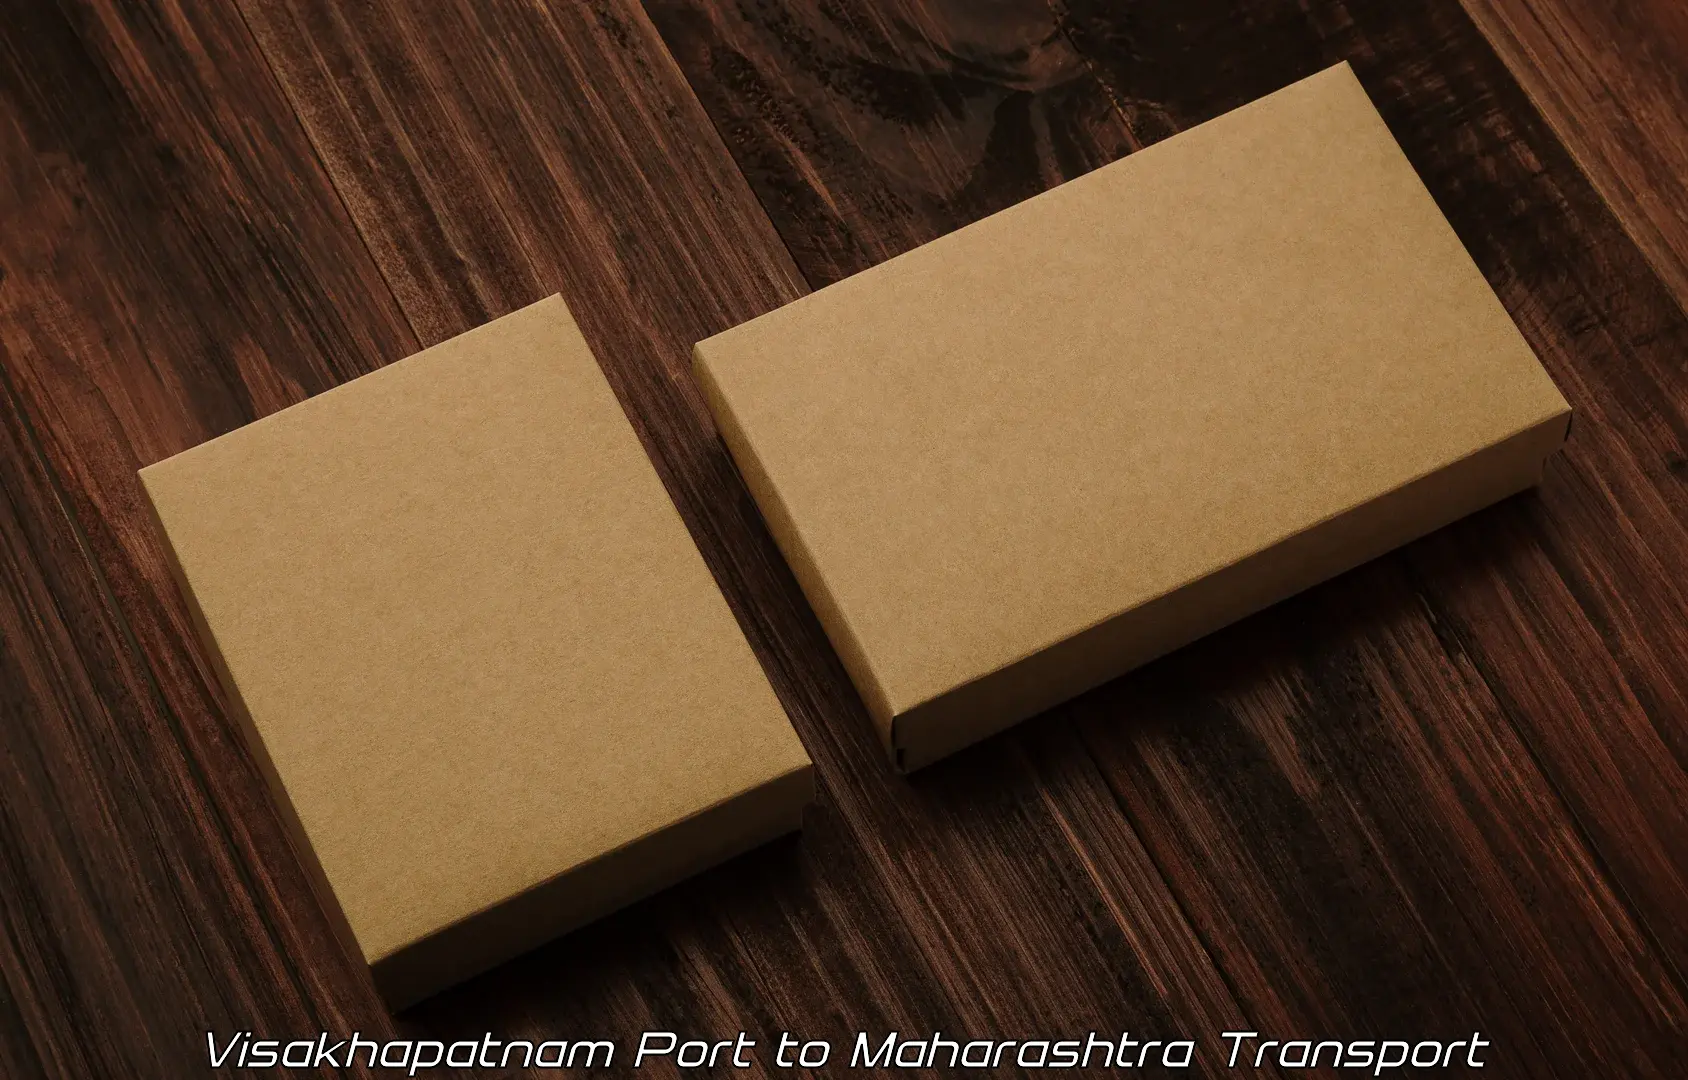 Truck transport companies in India Visakhapatnam Port to Masrul